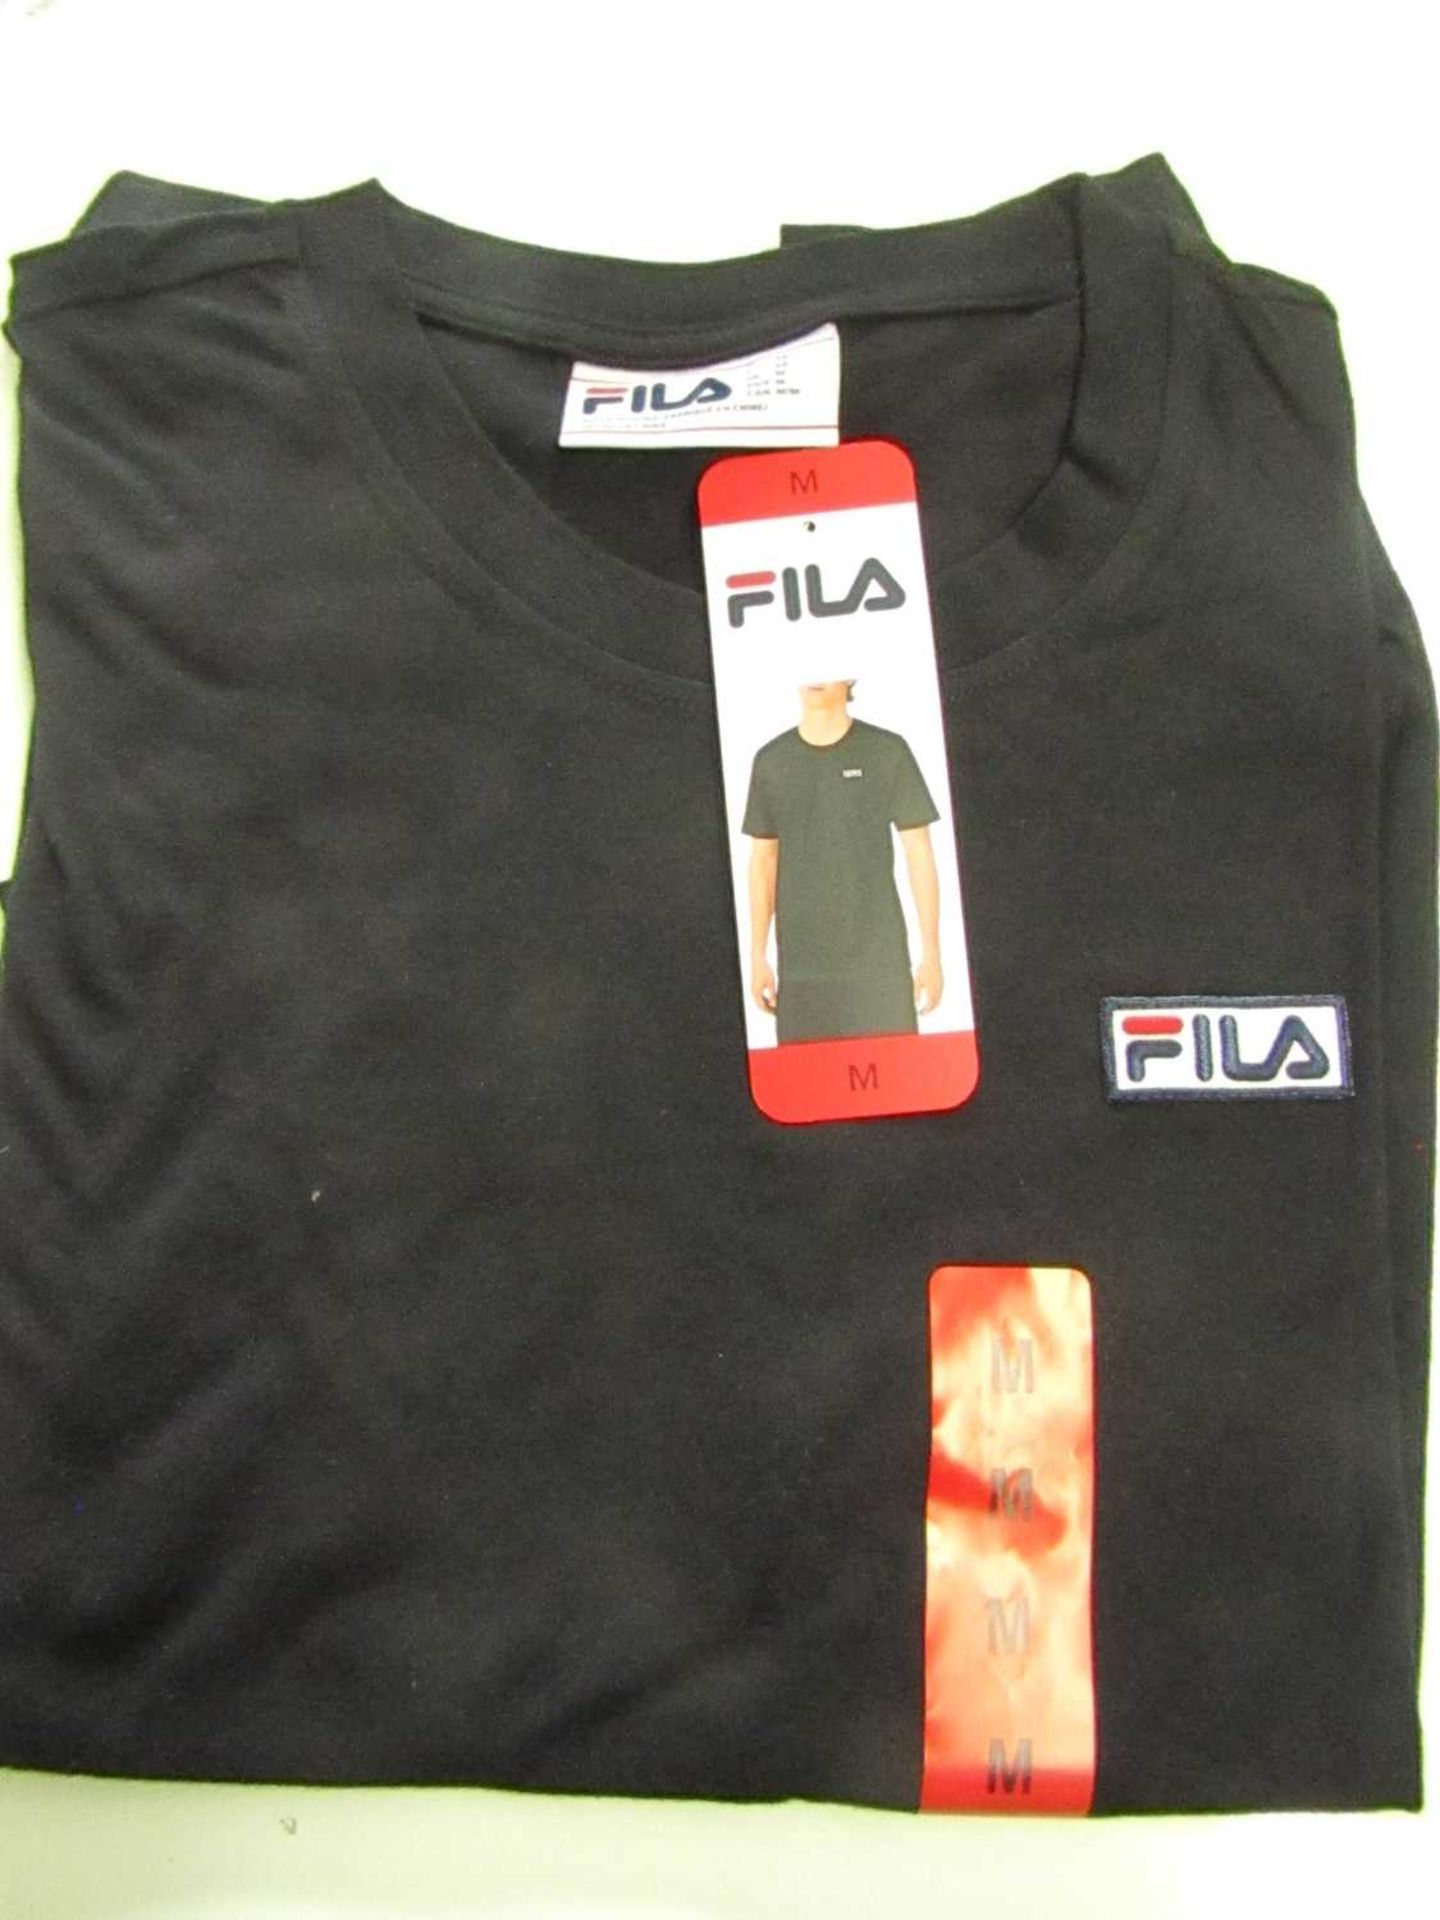 Fila Lucano T/Shirt Black Size M New With Tags